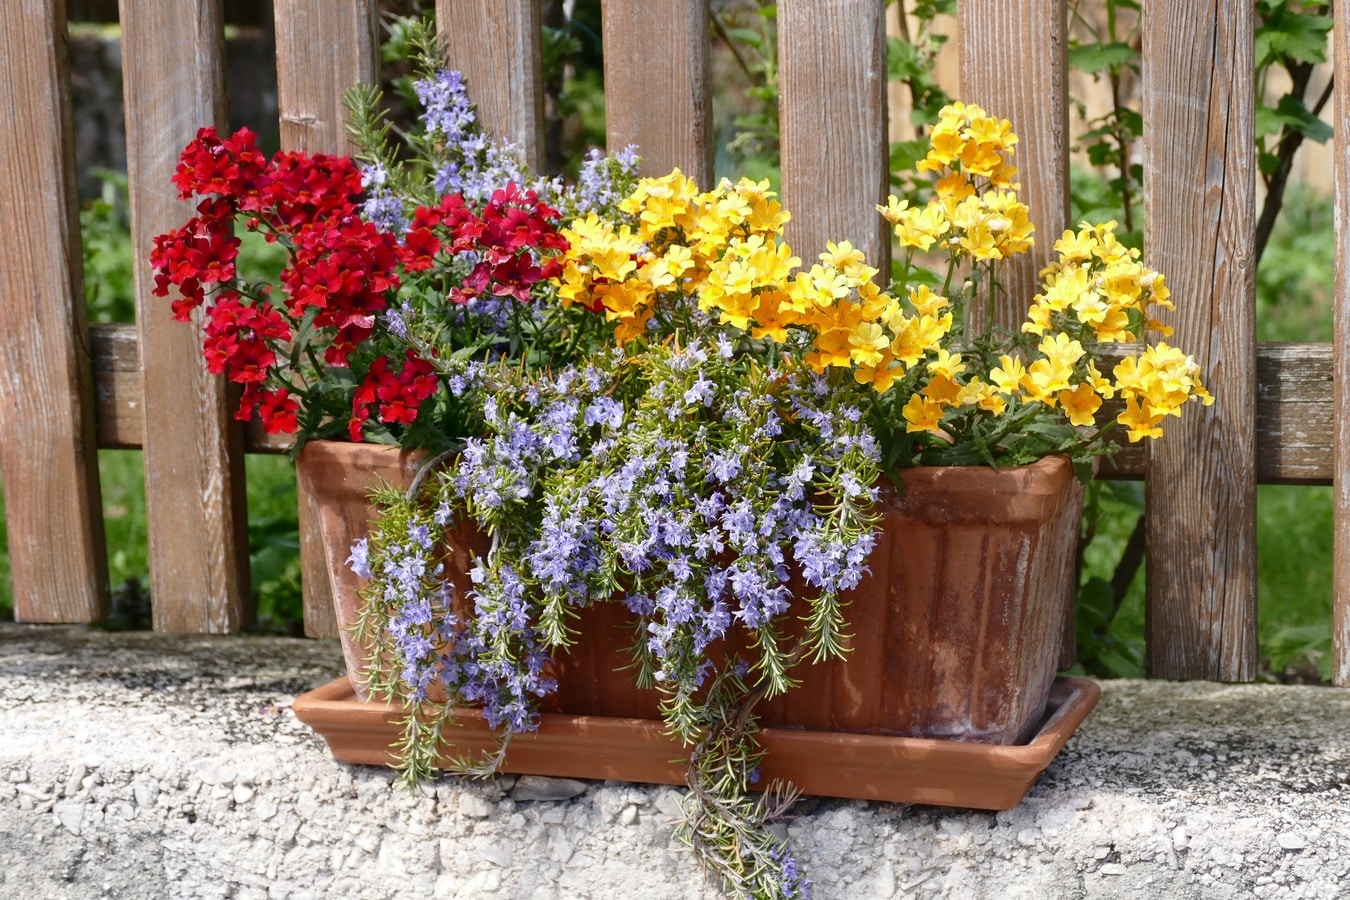 There are many outdoor plants that can be in pots